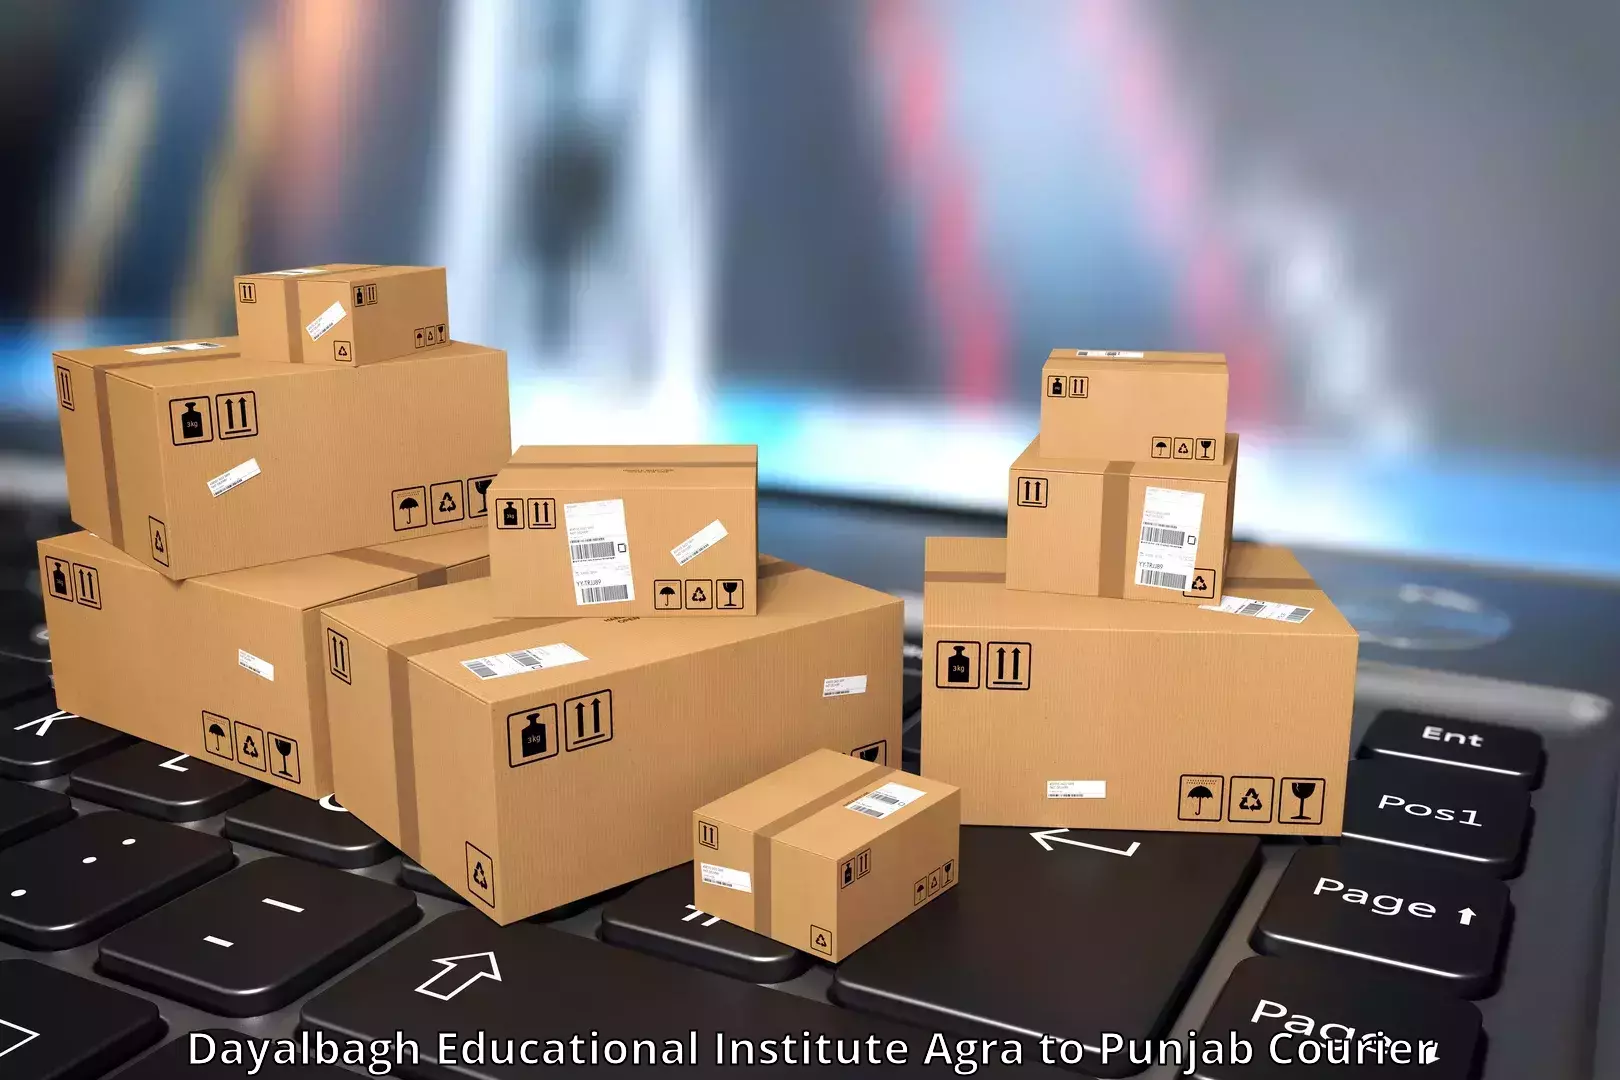 Seamless shipping service Dayalbagh Educational Institute Agra to Samana